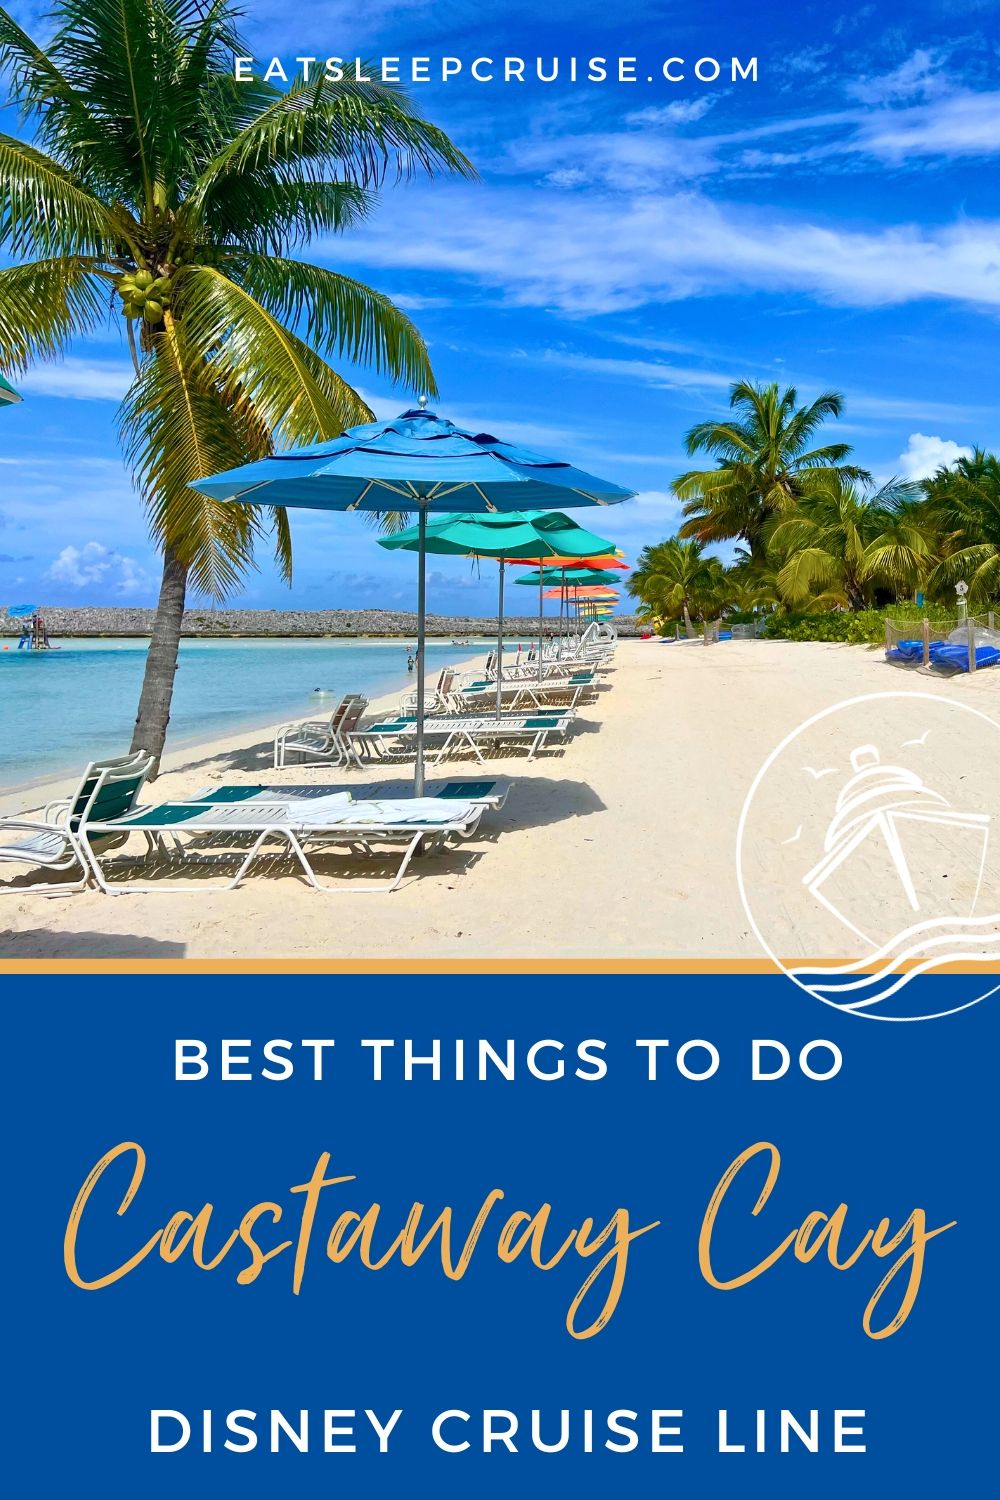 The BEST Things to Do at Castaway Cay During Your Disney Cruise